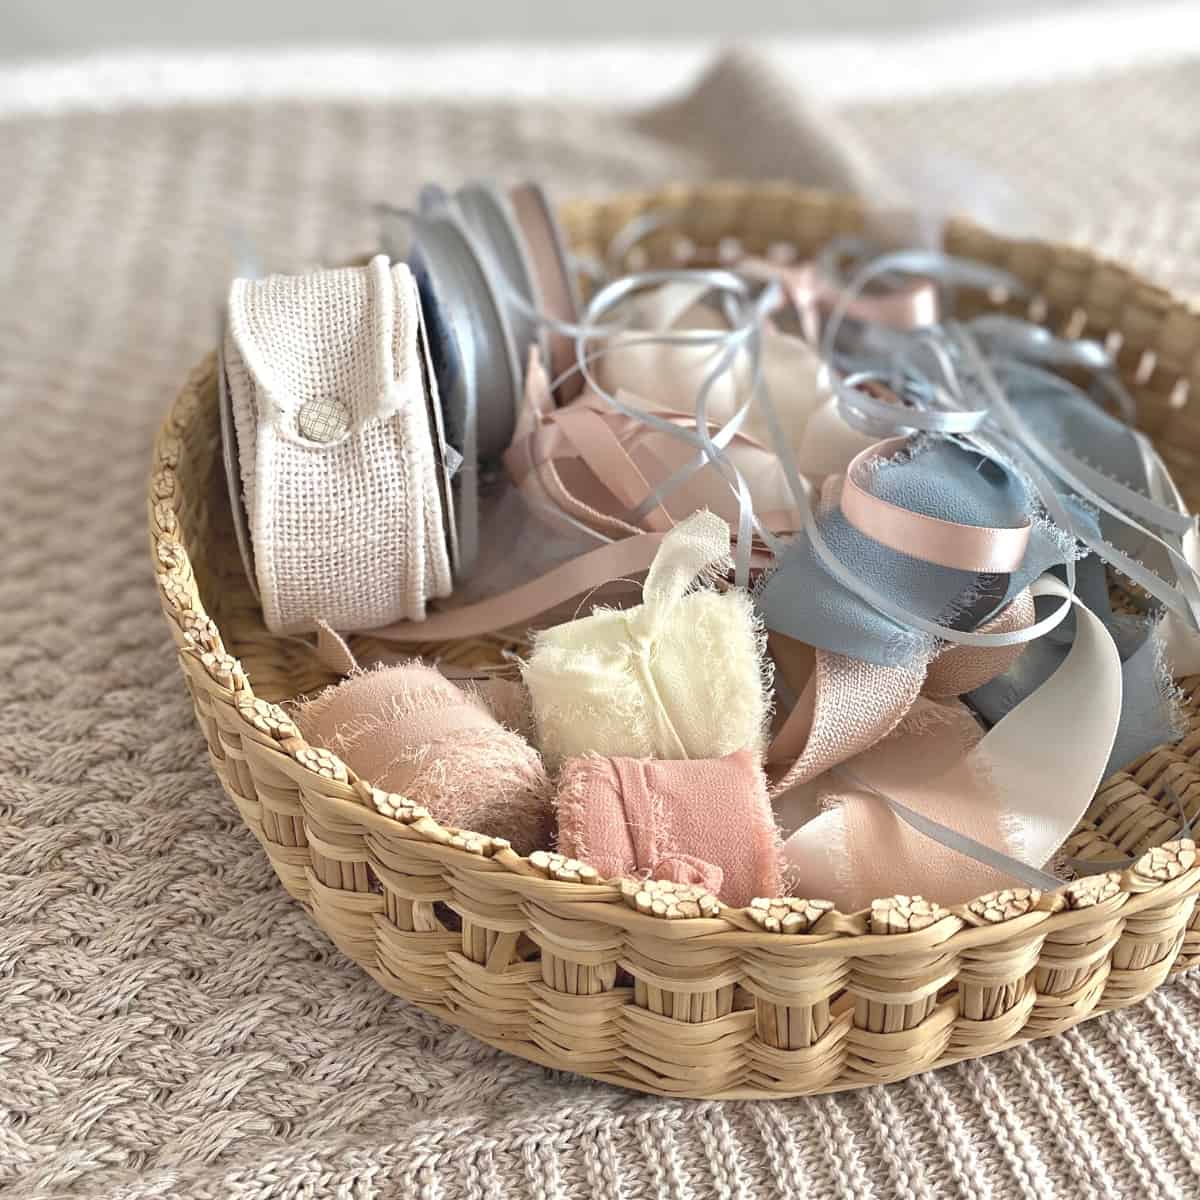 Rolls of ribbon and loose ribbon in a basket tray